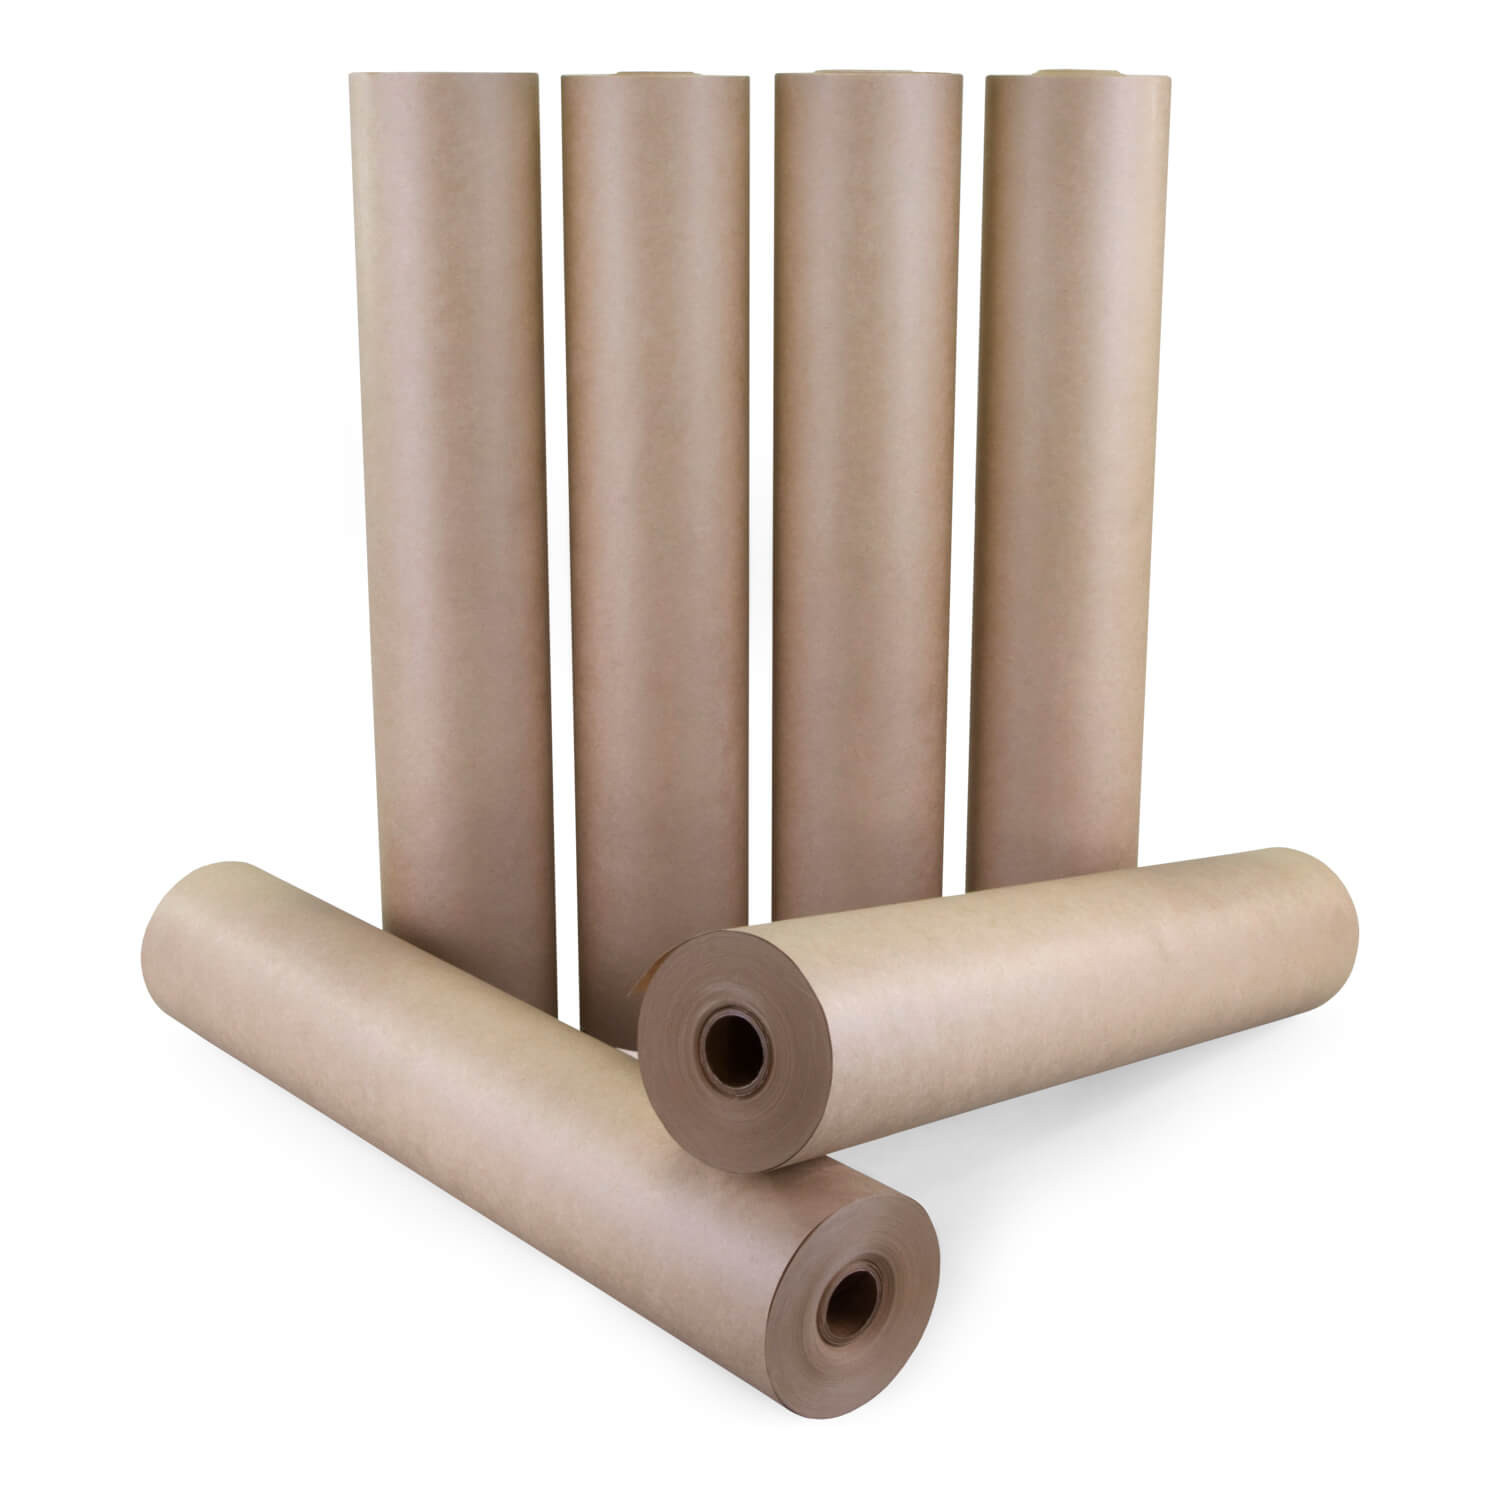 https://idlpack.com/image/cache/catalog/Products/Kraft-Paper/IDL-Packaging-KP1850-Heavy-Duty-Kraft-Paper-Roll-18-inch-widht-and-150-foot-length-6-rolls-1500x1500.jpg